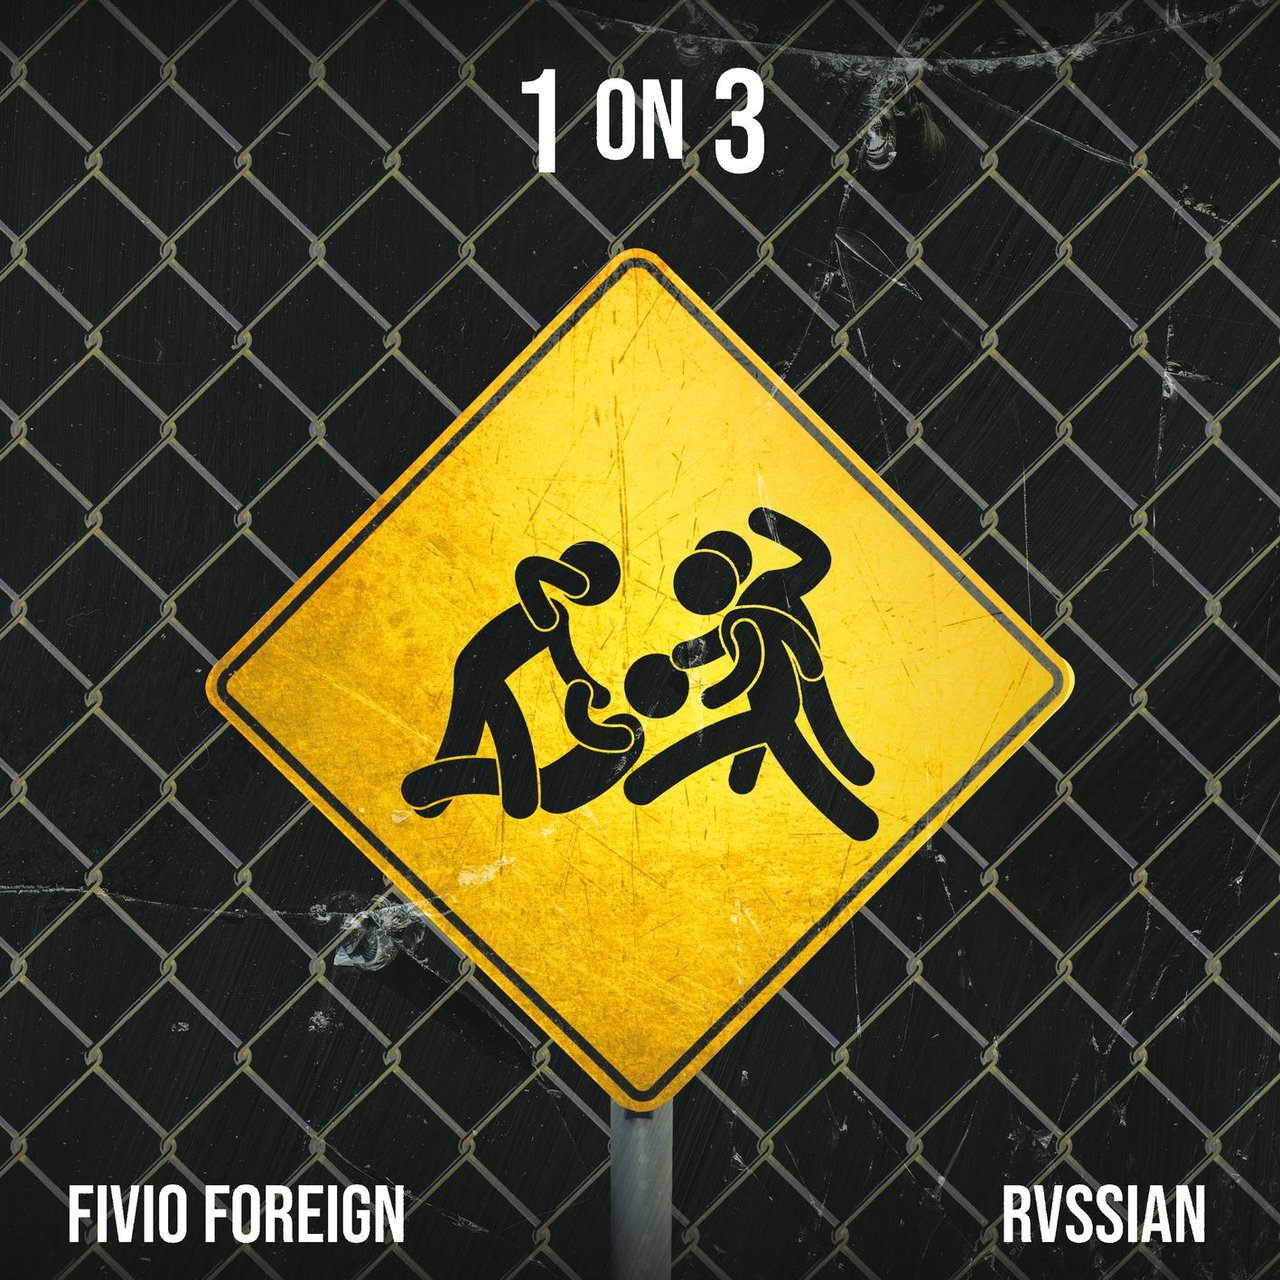 Fivio Foreign Locks In With Rvssian For “1 On 3”